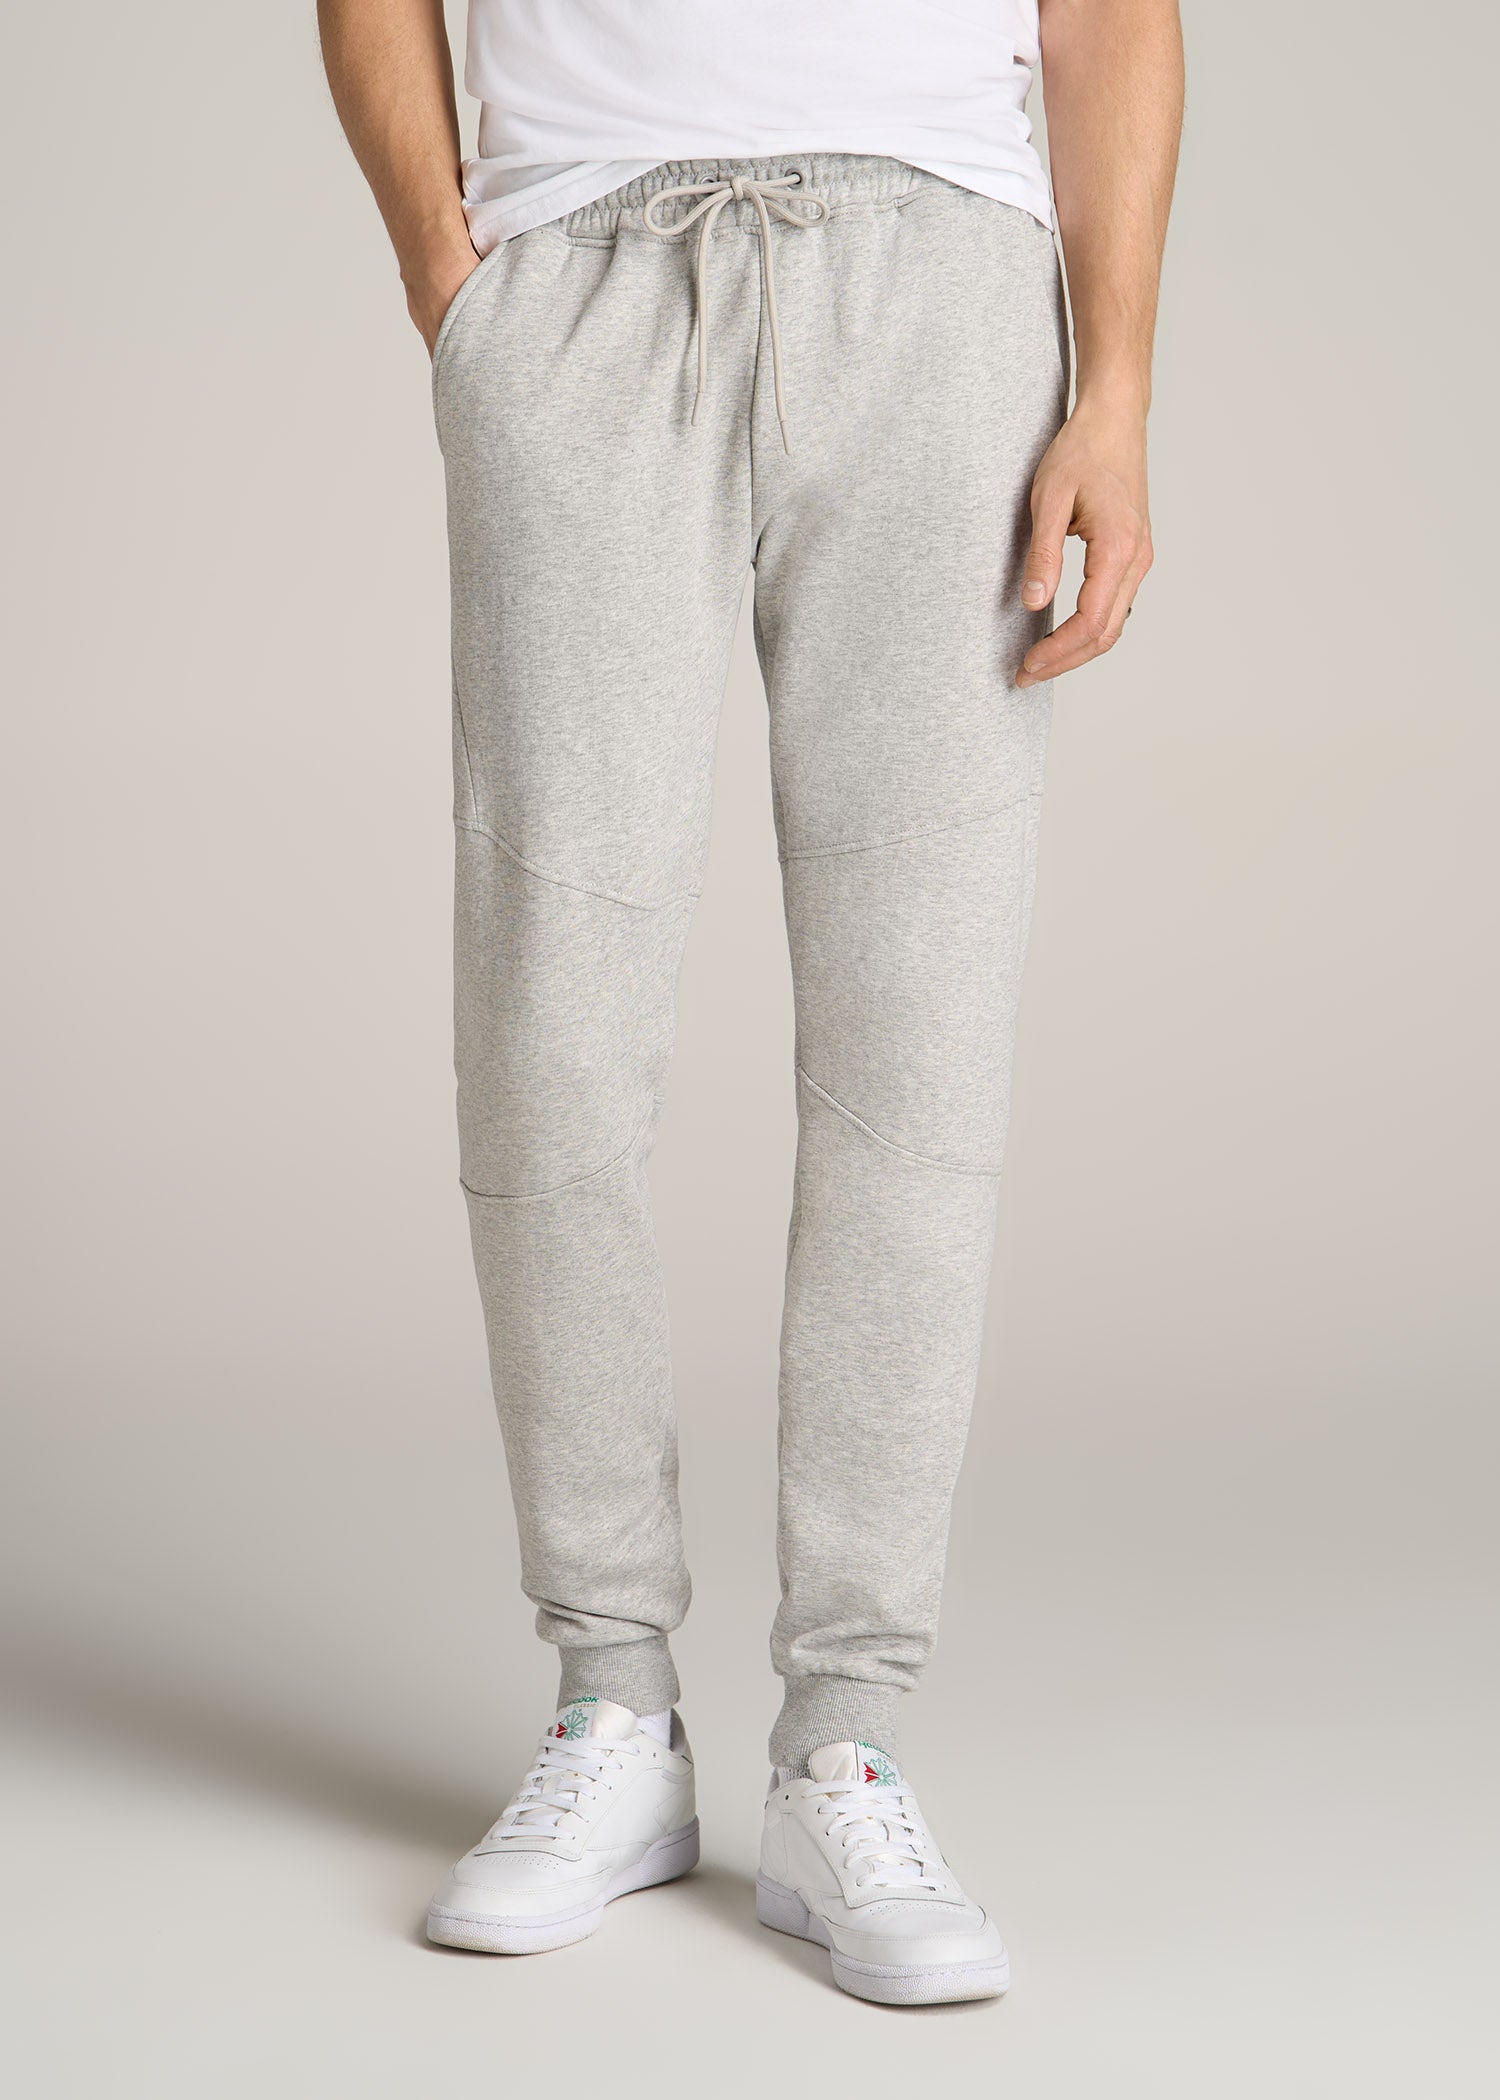 Performance Jogger - Long, Tall Pale Grey Joggers